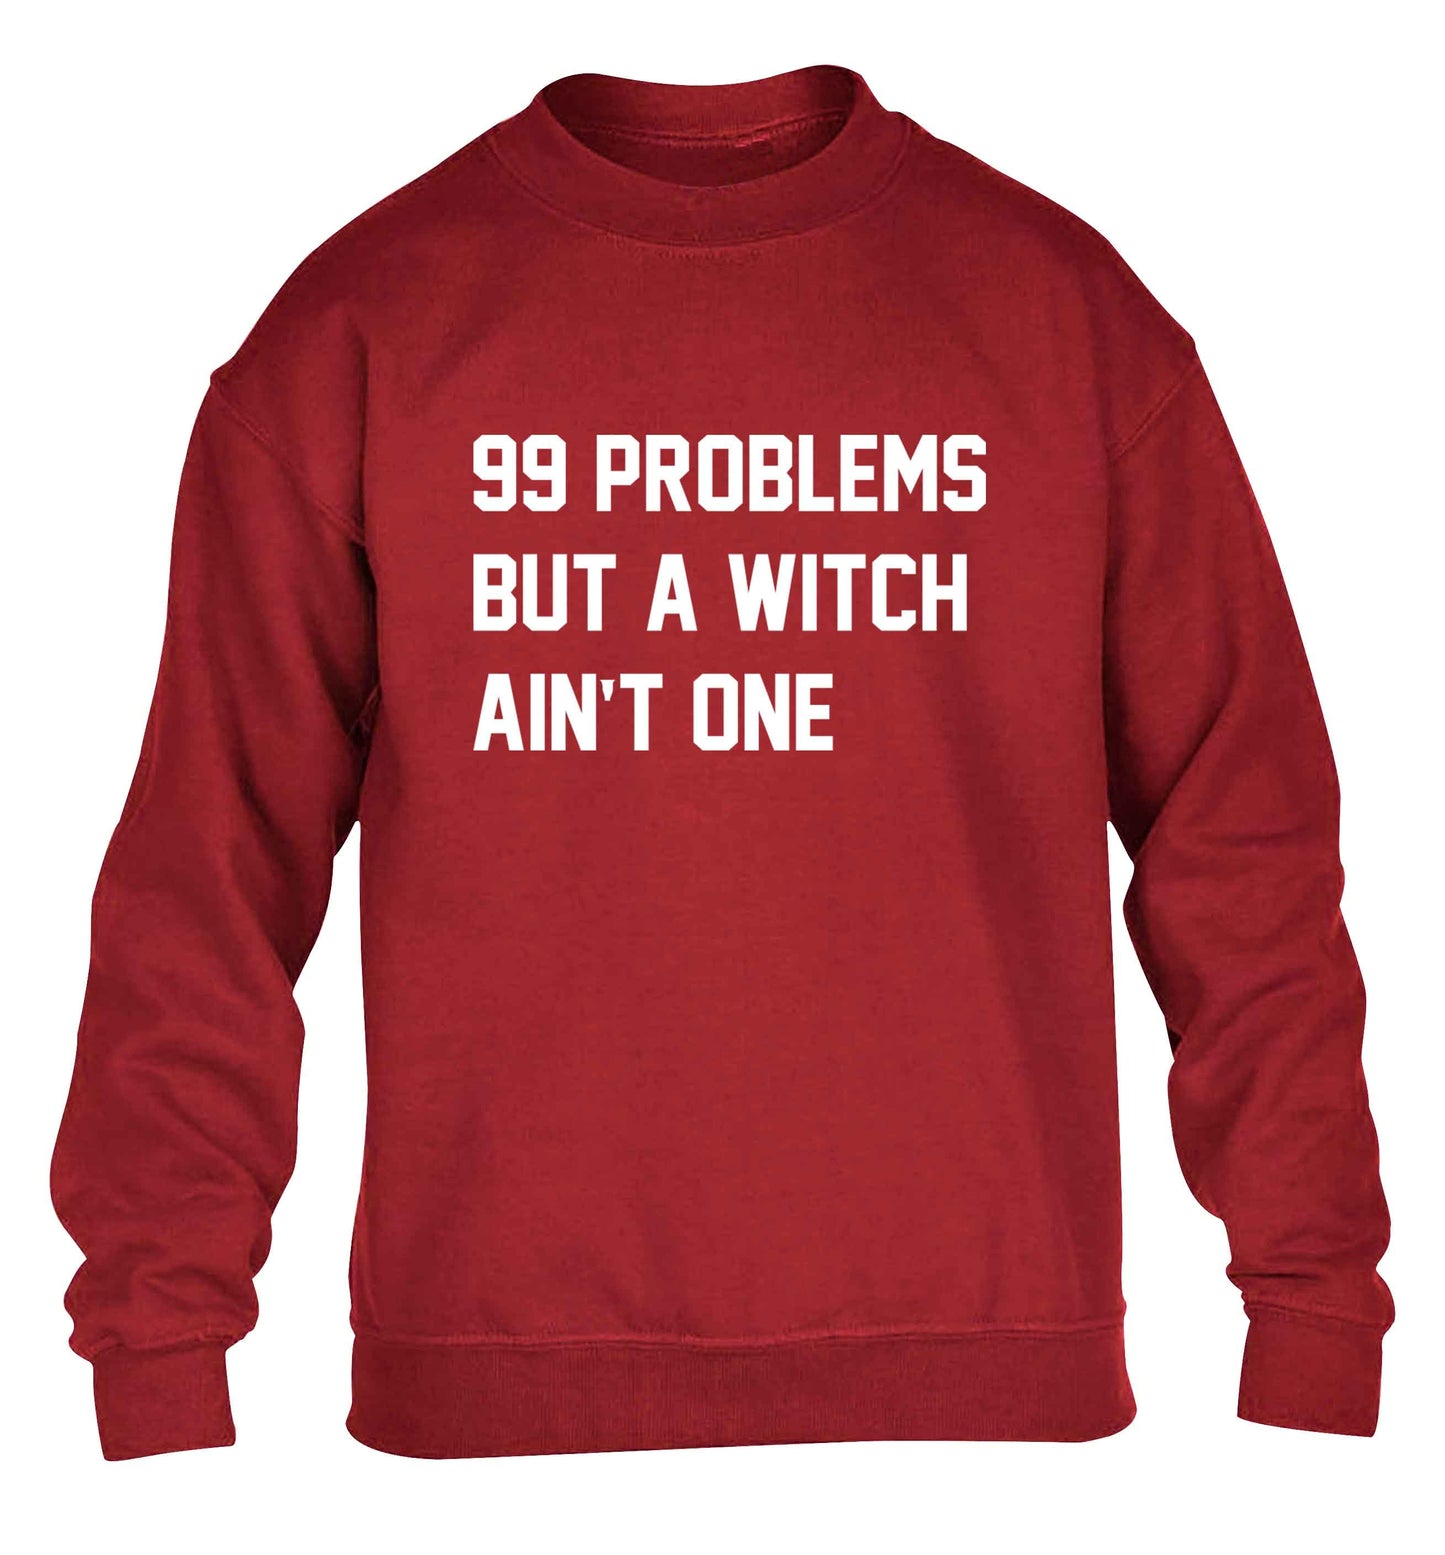 99 Problems but a witch aint one children's grey sweater 12-13 Years